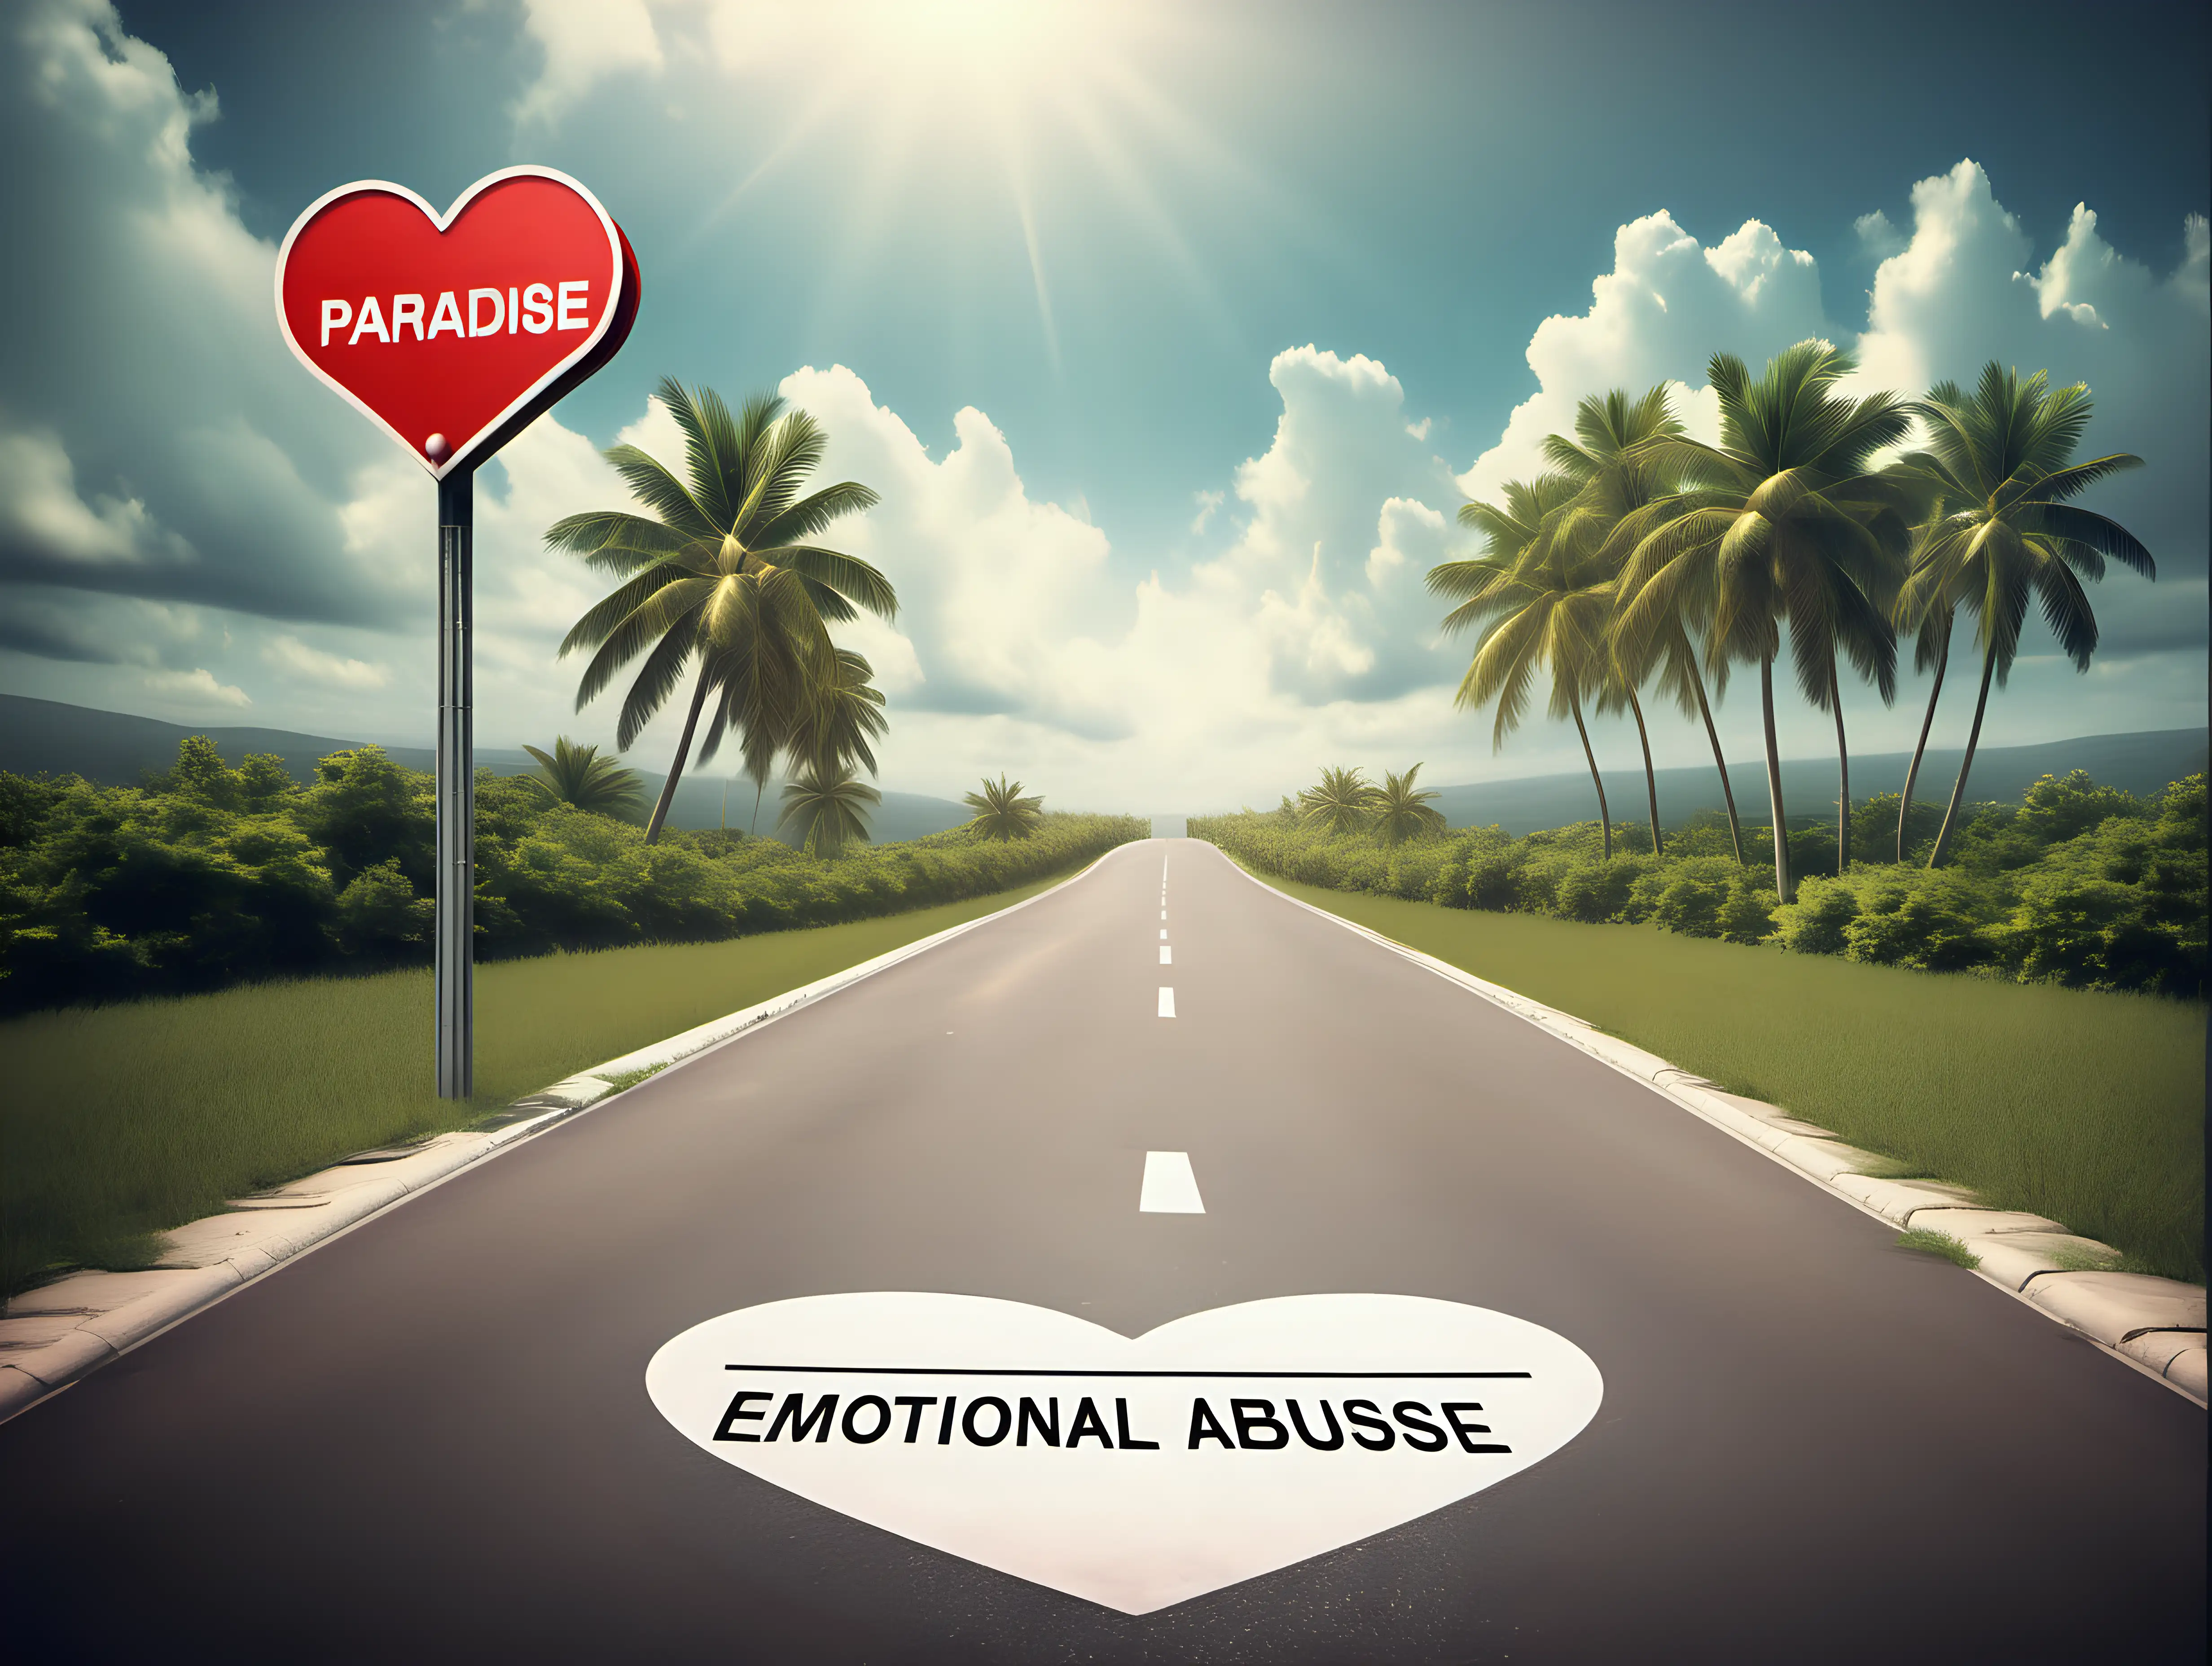 picture with paradise view and street sign in the shape of the heart,where it is written caution emotional abuse. Correct the mistake and write correctly emotional abuse